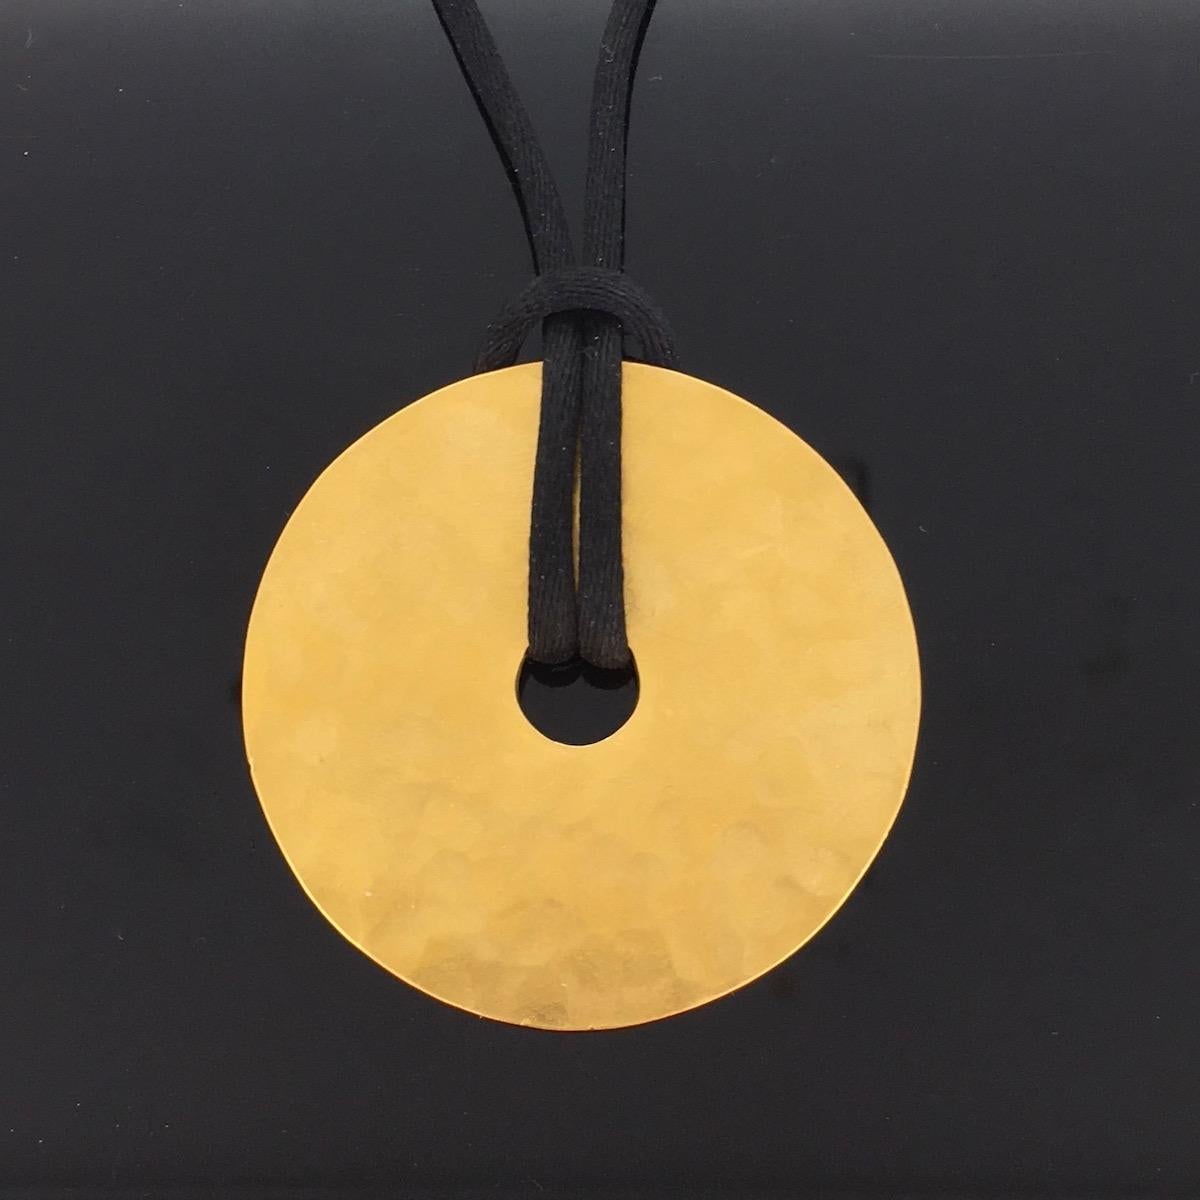 A timeless hand hammered pendant by Dinh Van. In the ancient Chinese art, Pi discs, often crafted in jade, represent the sky, the infinite and well-being. The Pi disc was also used as an emblem of authority by the sovereigns and was sometimes